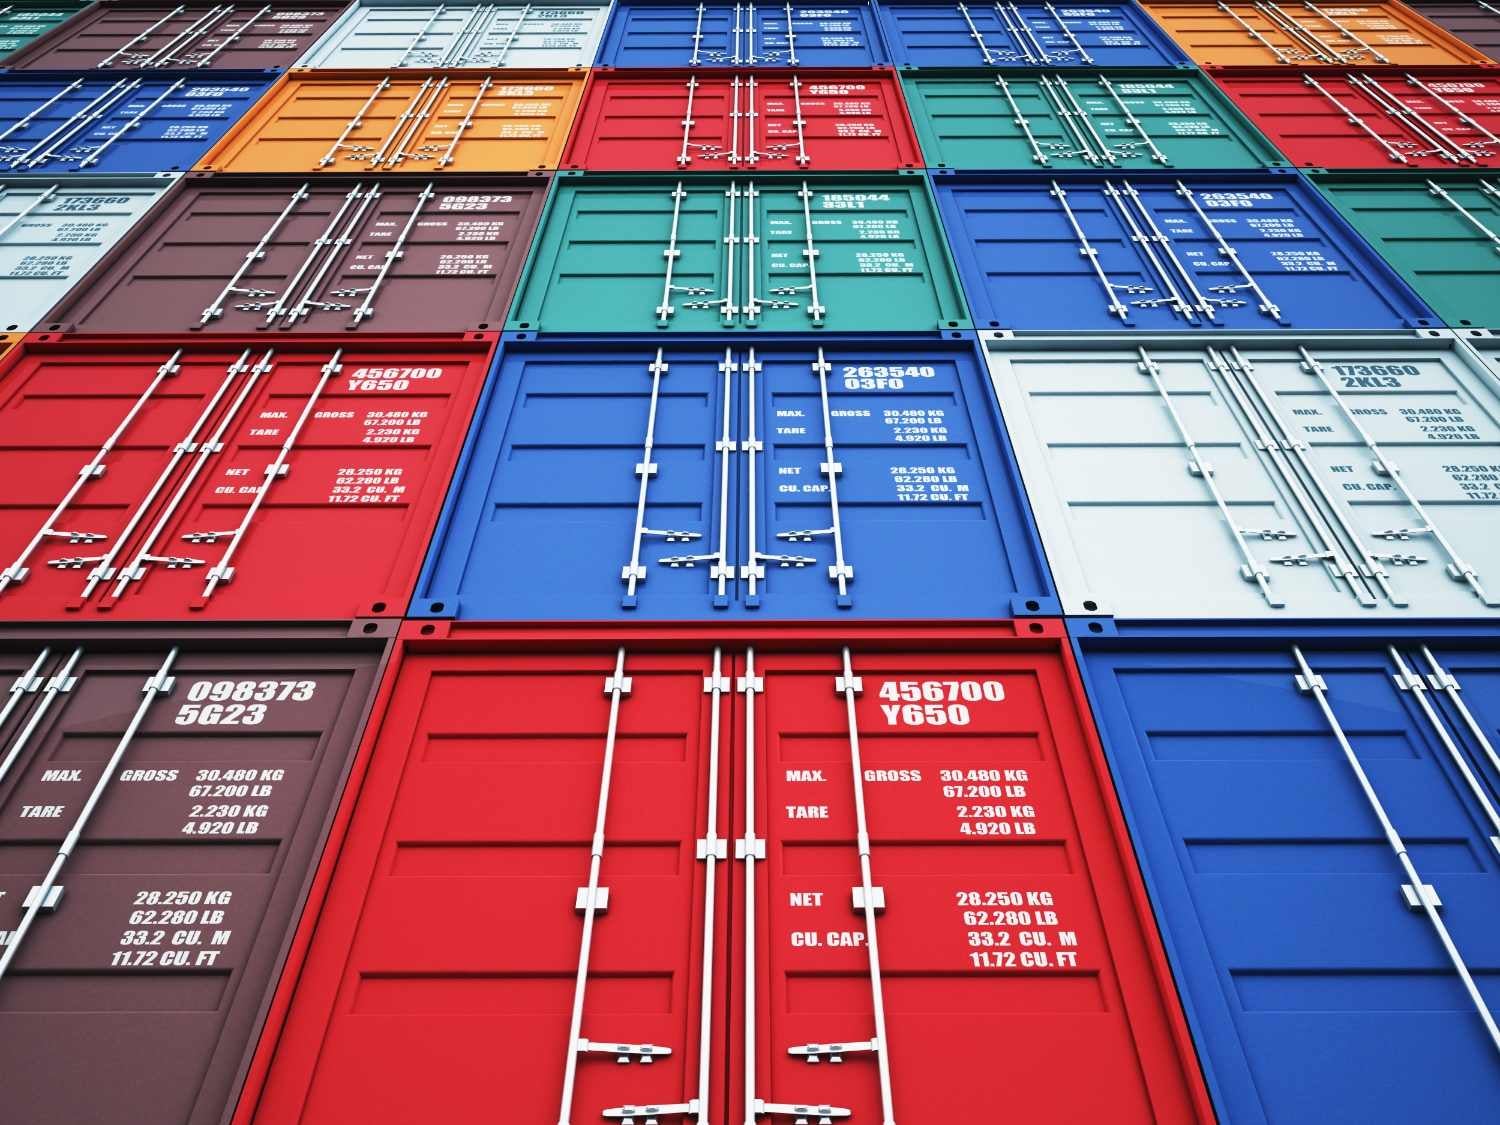 Abstract image of stacked shipping containers